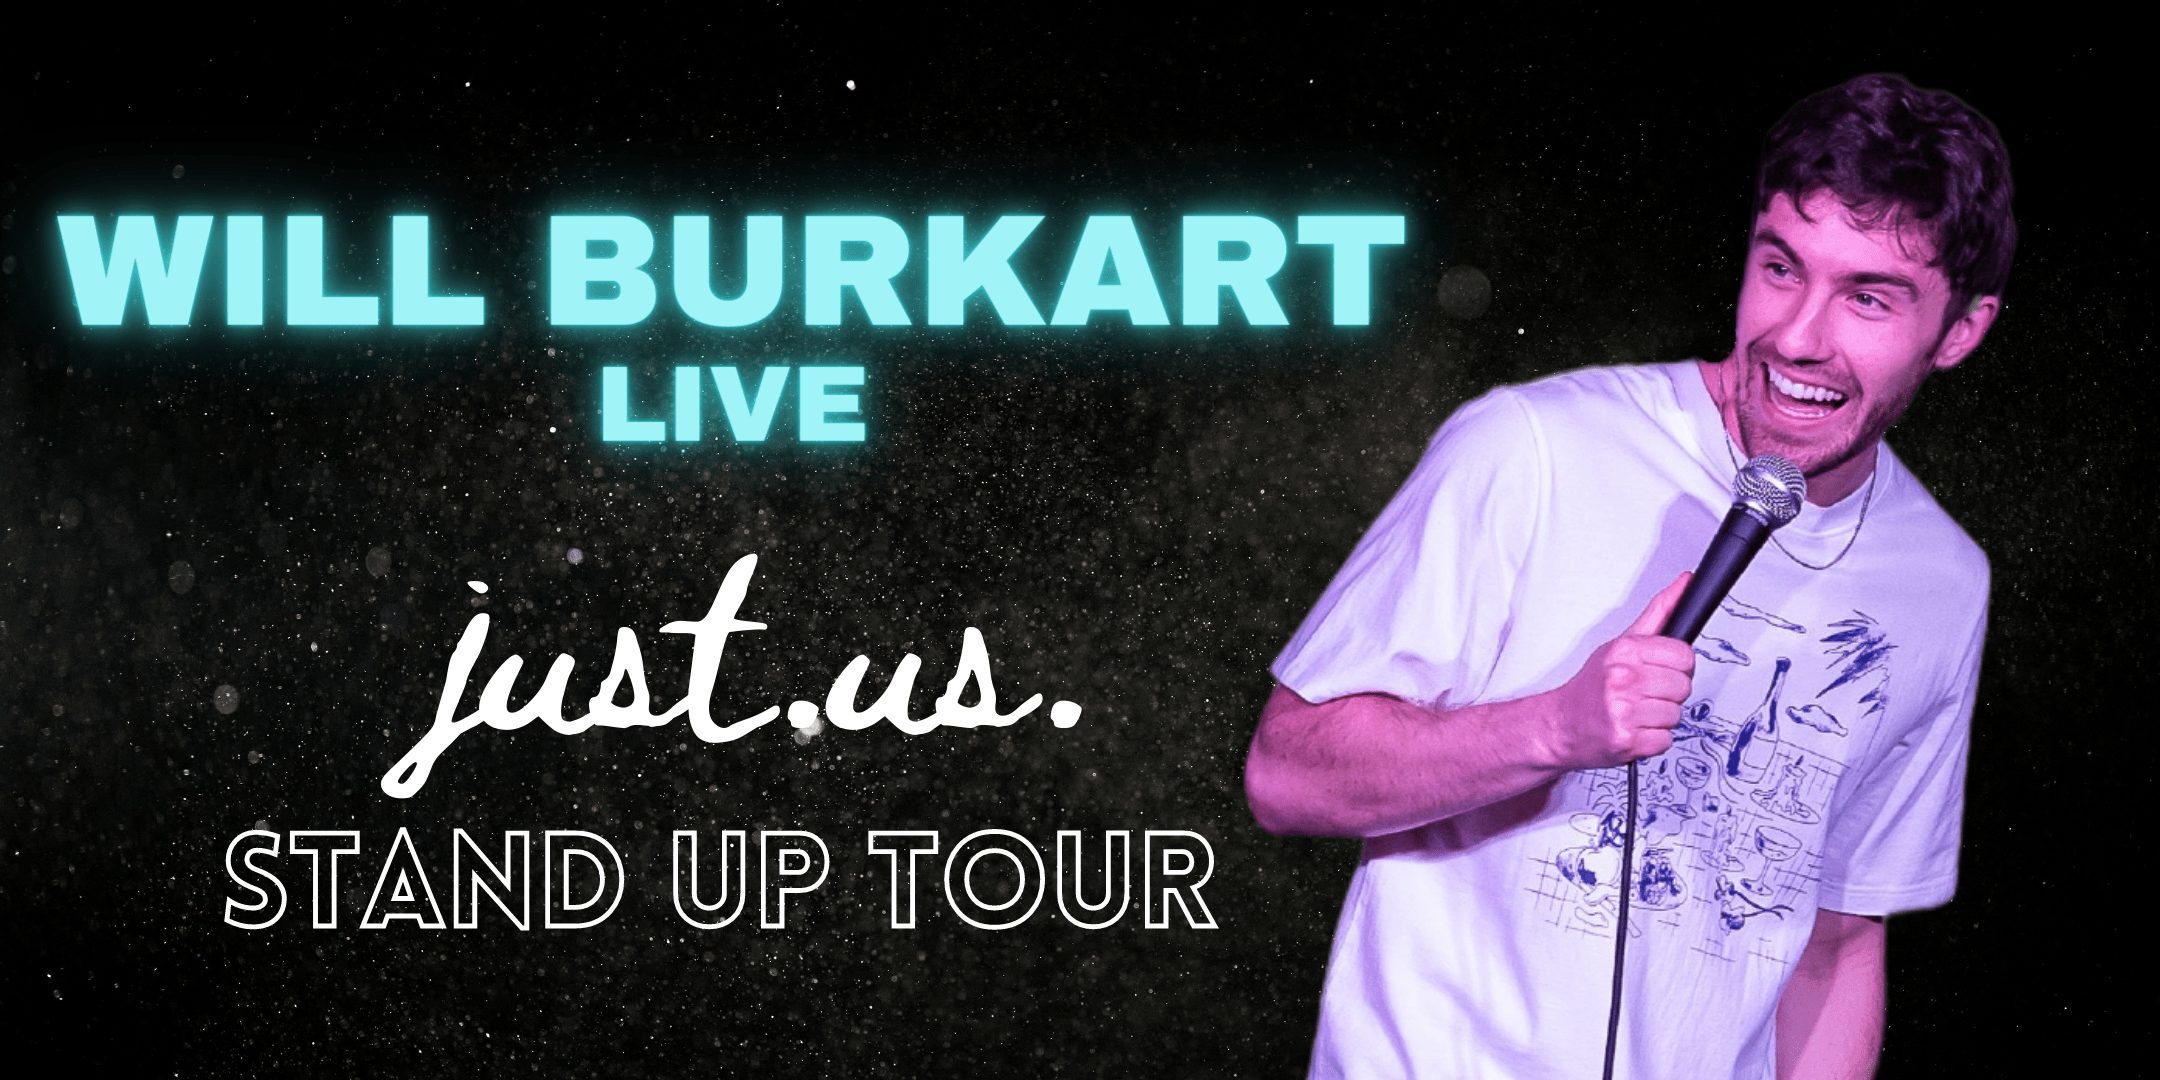 Will Burkart live. Just Us Stand up tour.